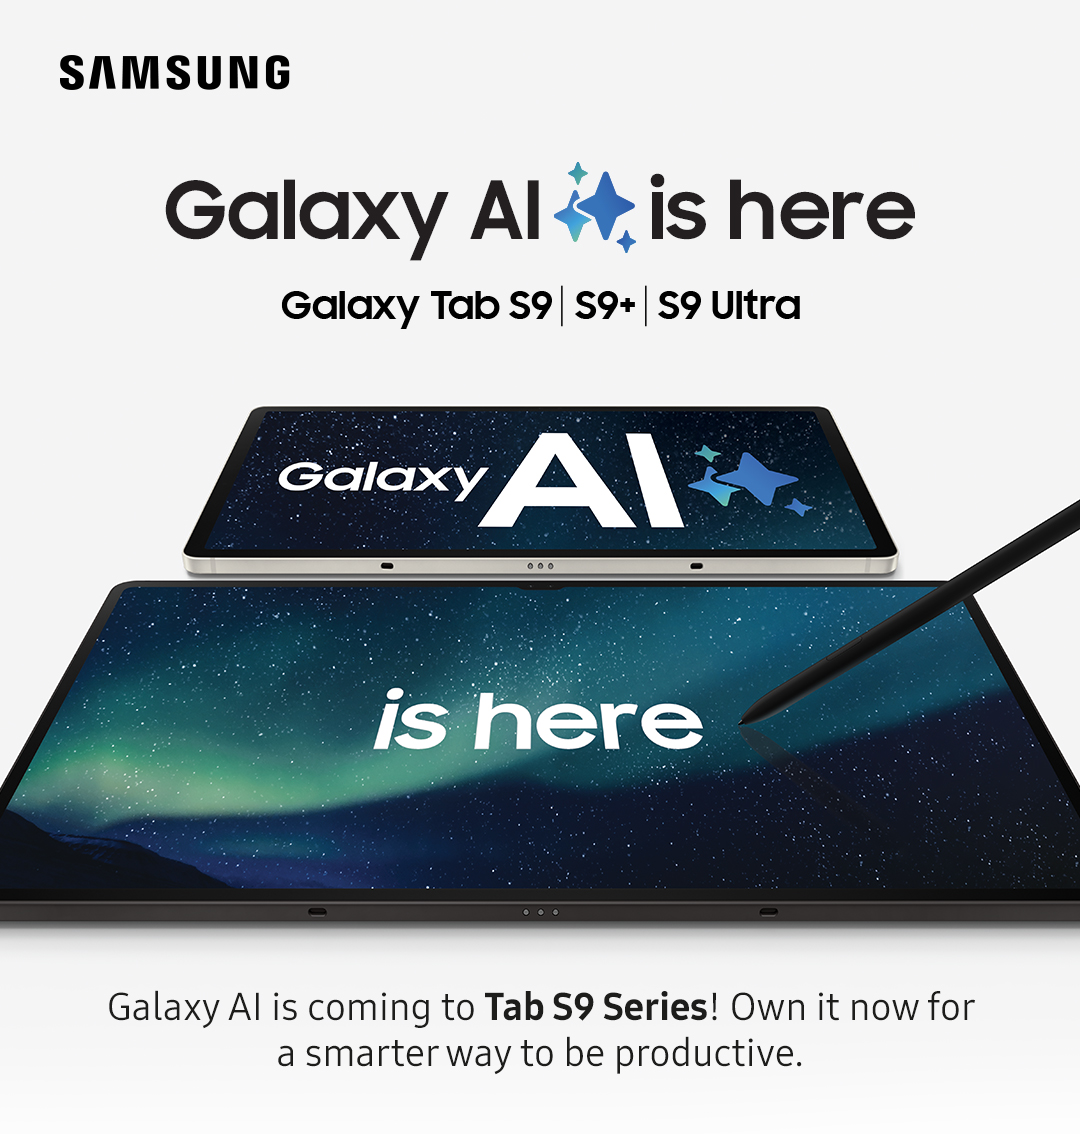 Galaxy AI is here | Galaxy Al is coming to Tab 59 Series! Own it now for a smarter way to be productive.